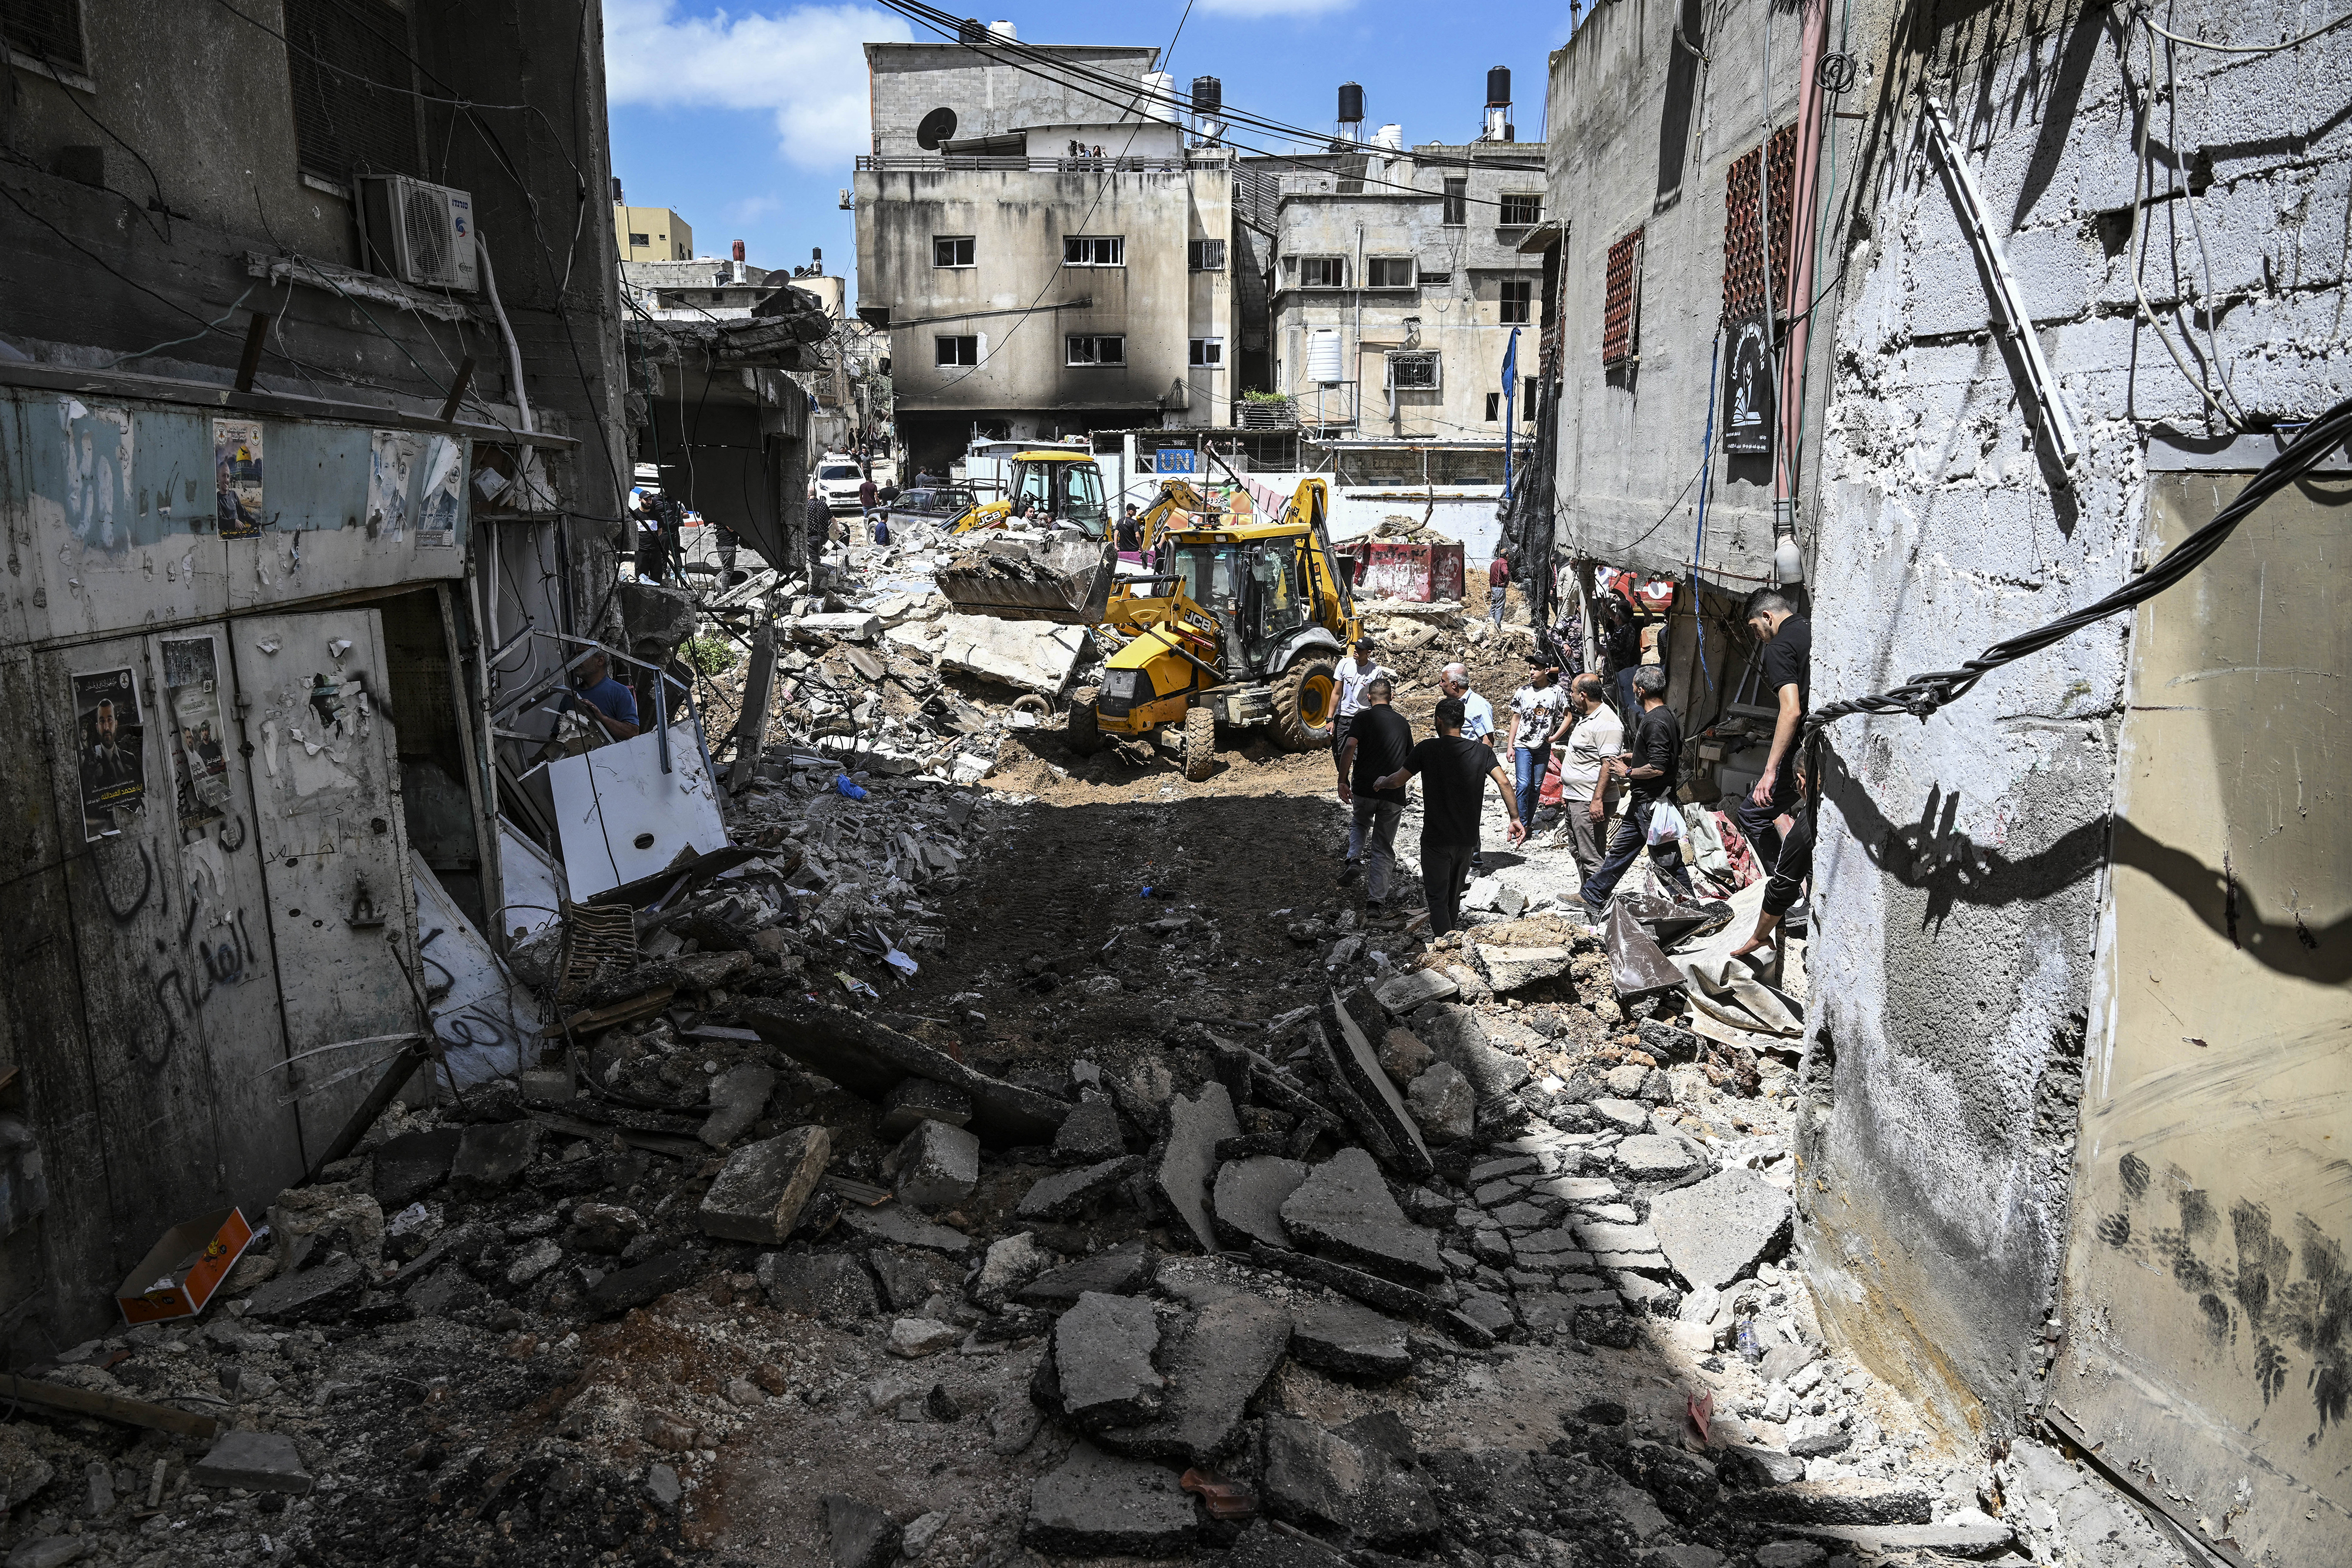 People inspect damage after a raid by Israeli forces in the Nur Shams refugee camp in the occupied West Bank on April 21.